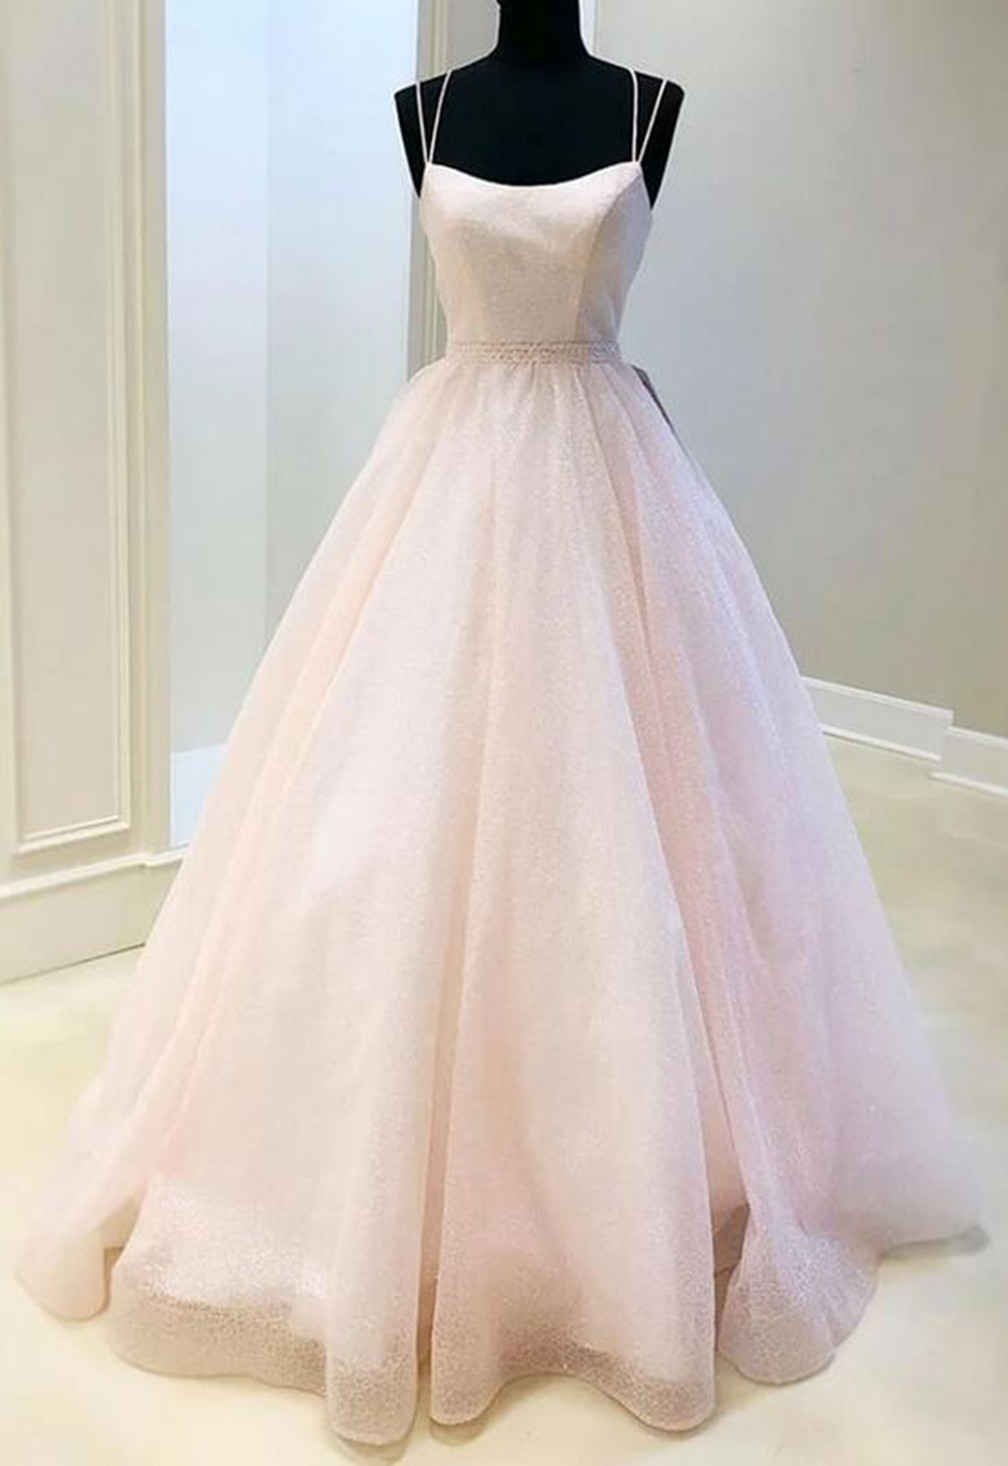 Women Tulle Sequins Prom Dresses Long A-line Evening Party Gowns Sleeveless Formal Dress Yp043